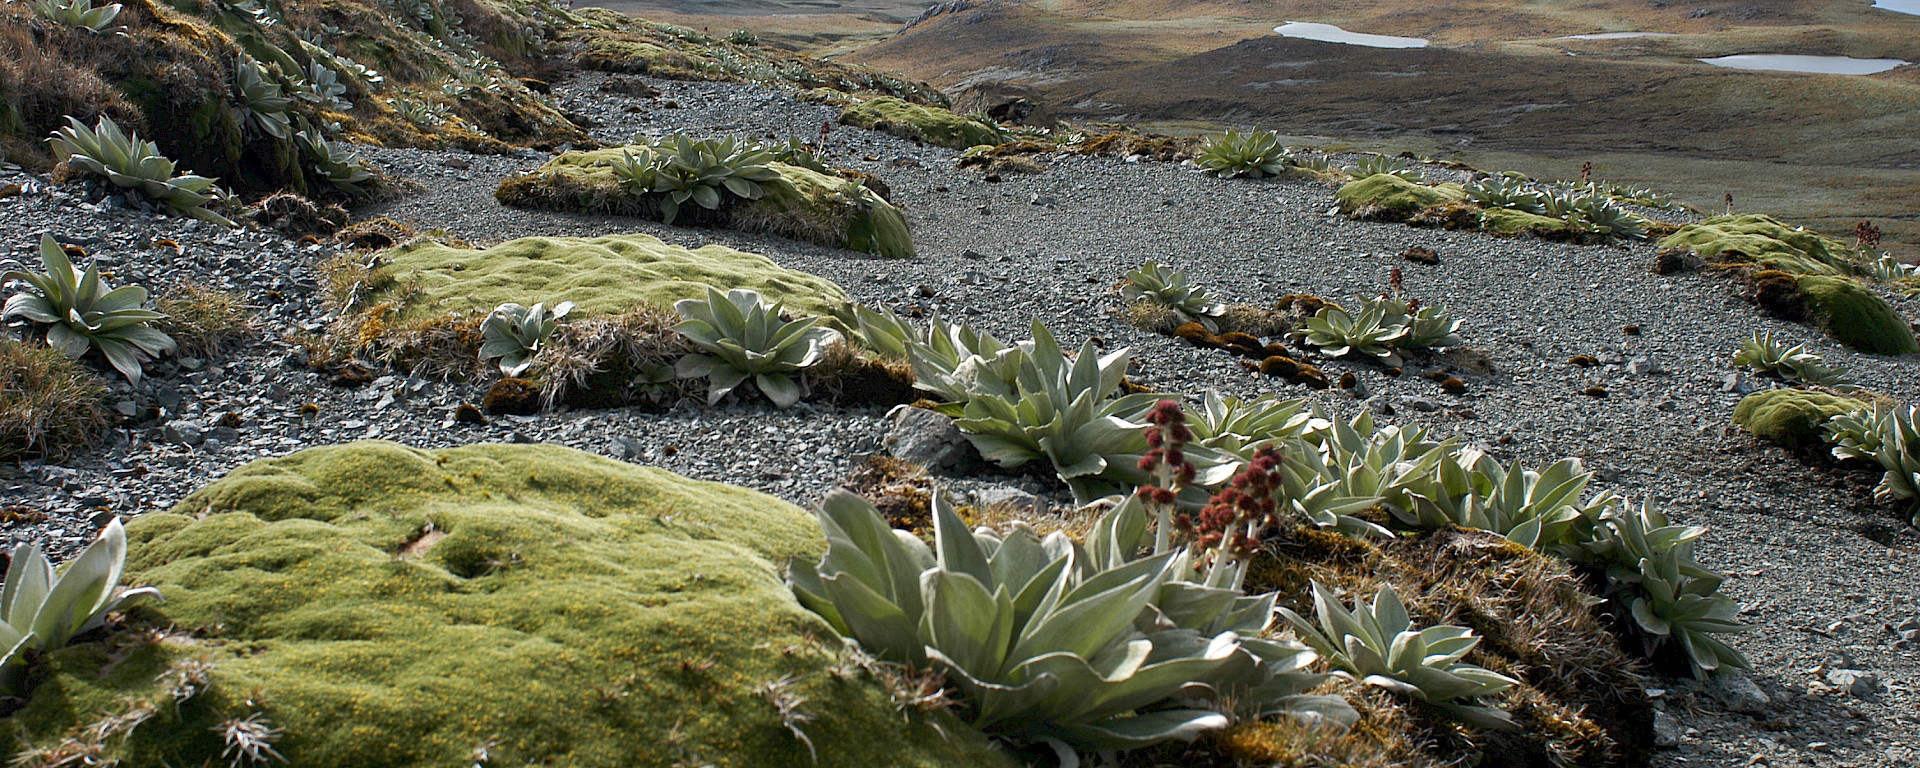 A healthy cushion plant (Azorella macquariensis) with other plants on the alpine plateau of Macquarie Island